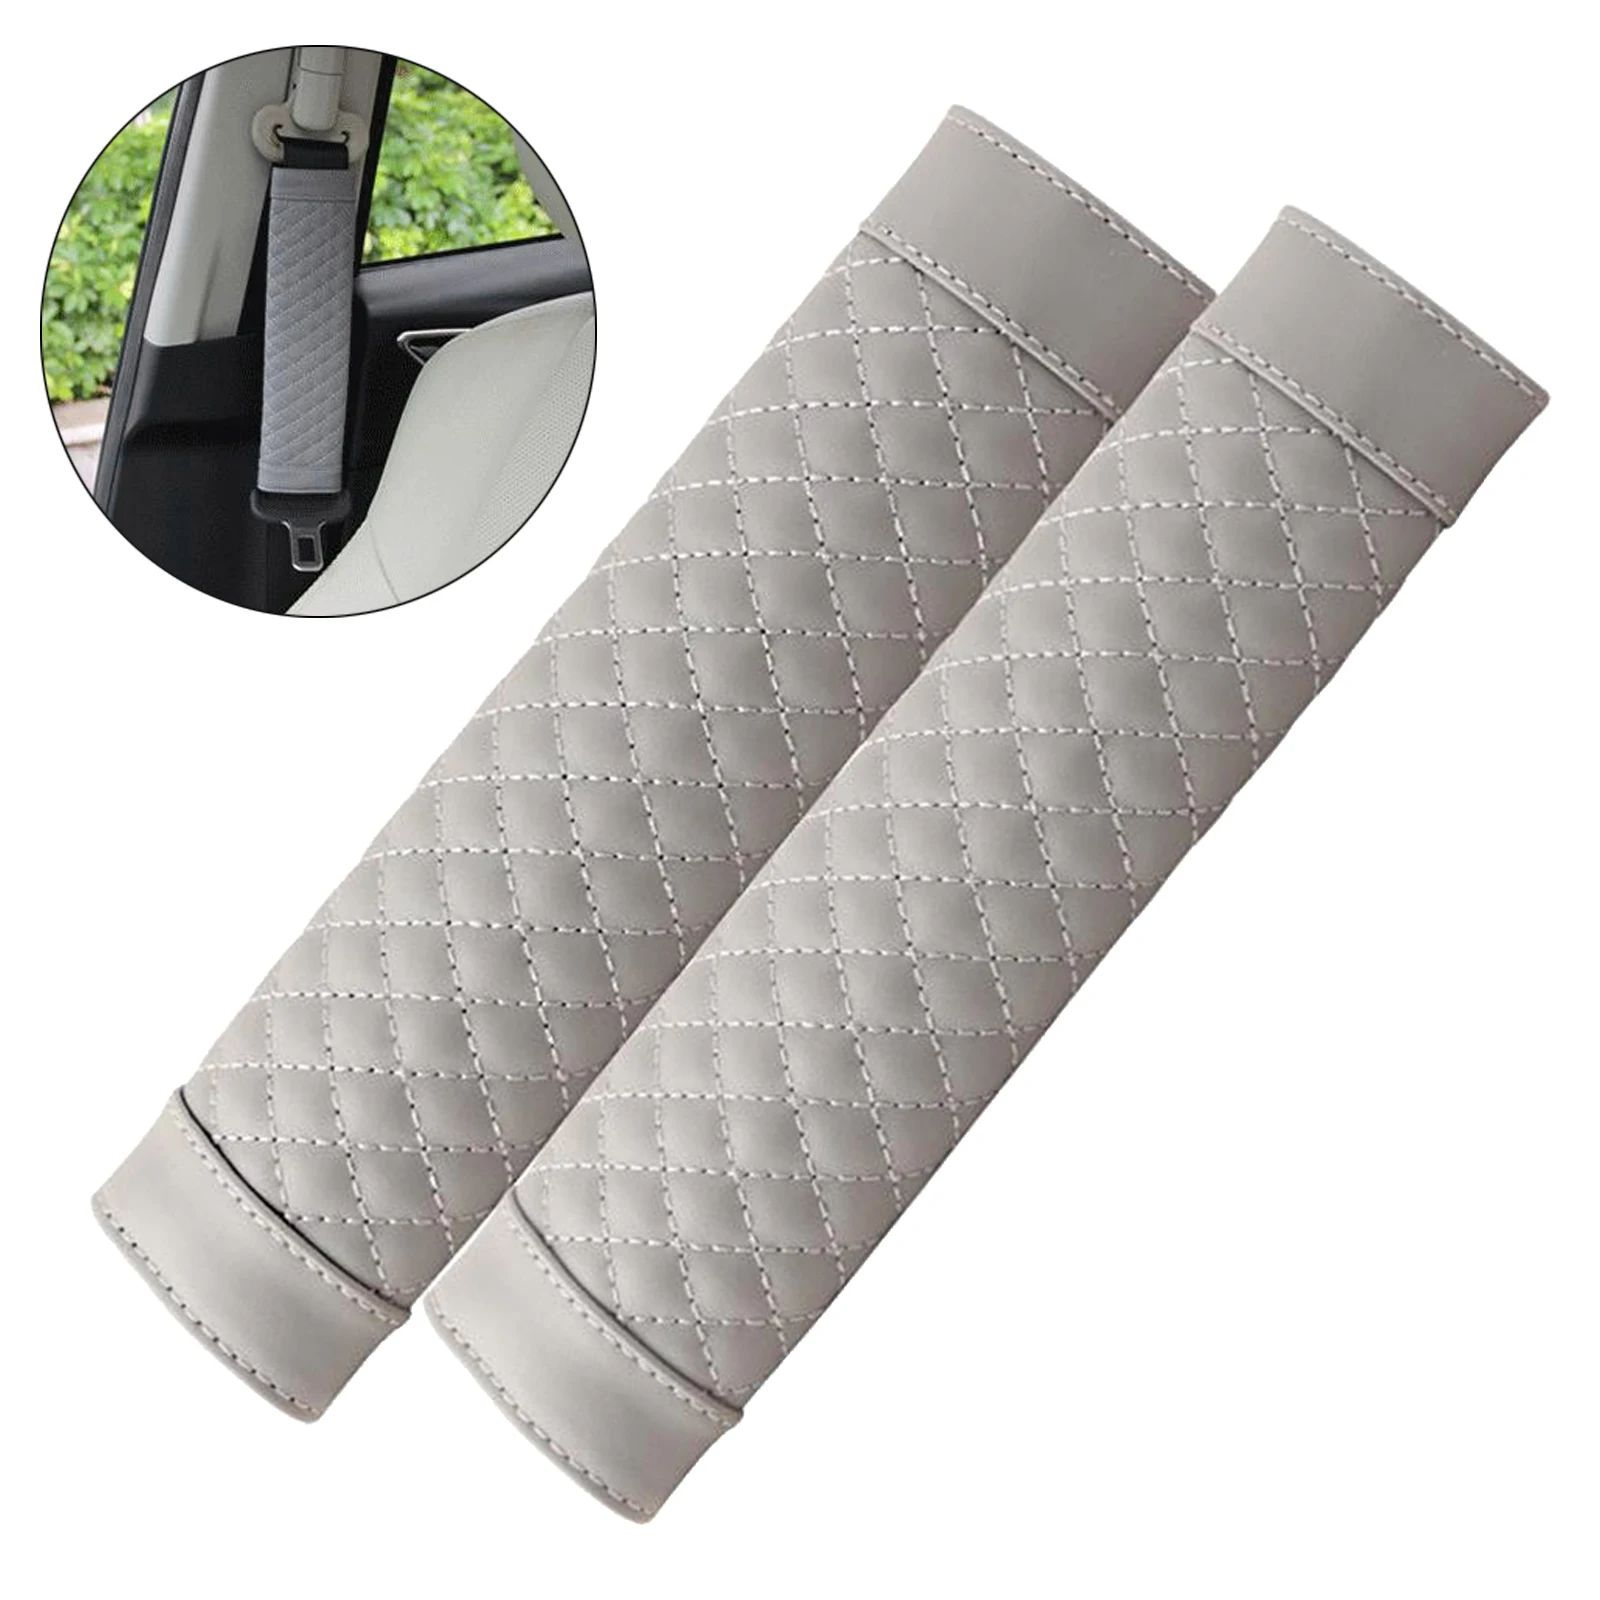 1Pair Universal Auto Car PU Leather Seatbelt Safety Seat Belt Pads Bag Cover Protect You Neck